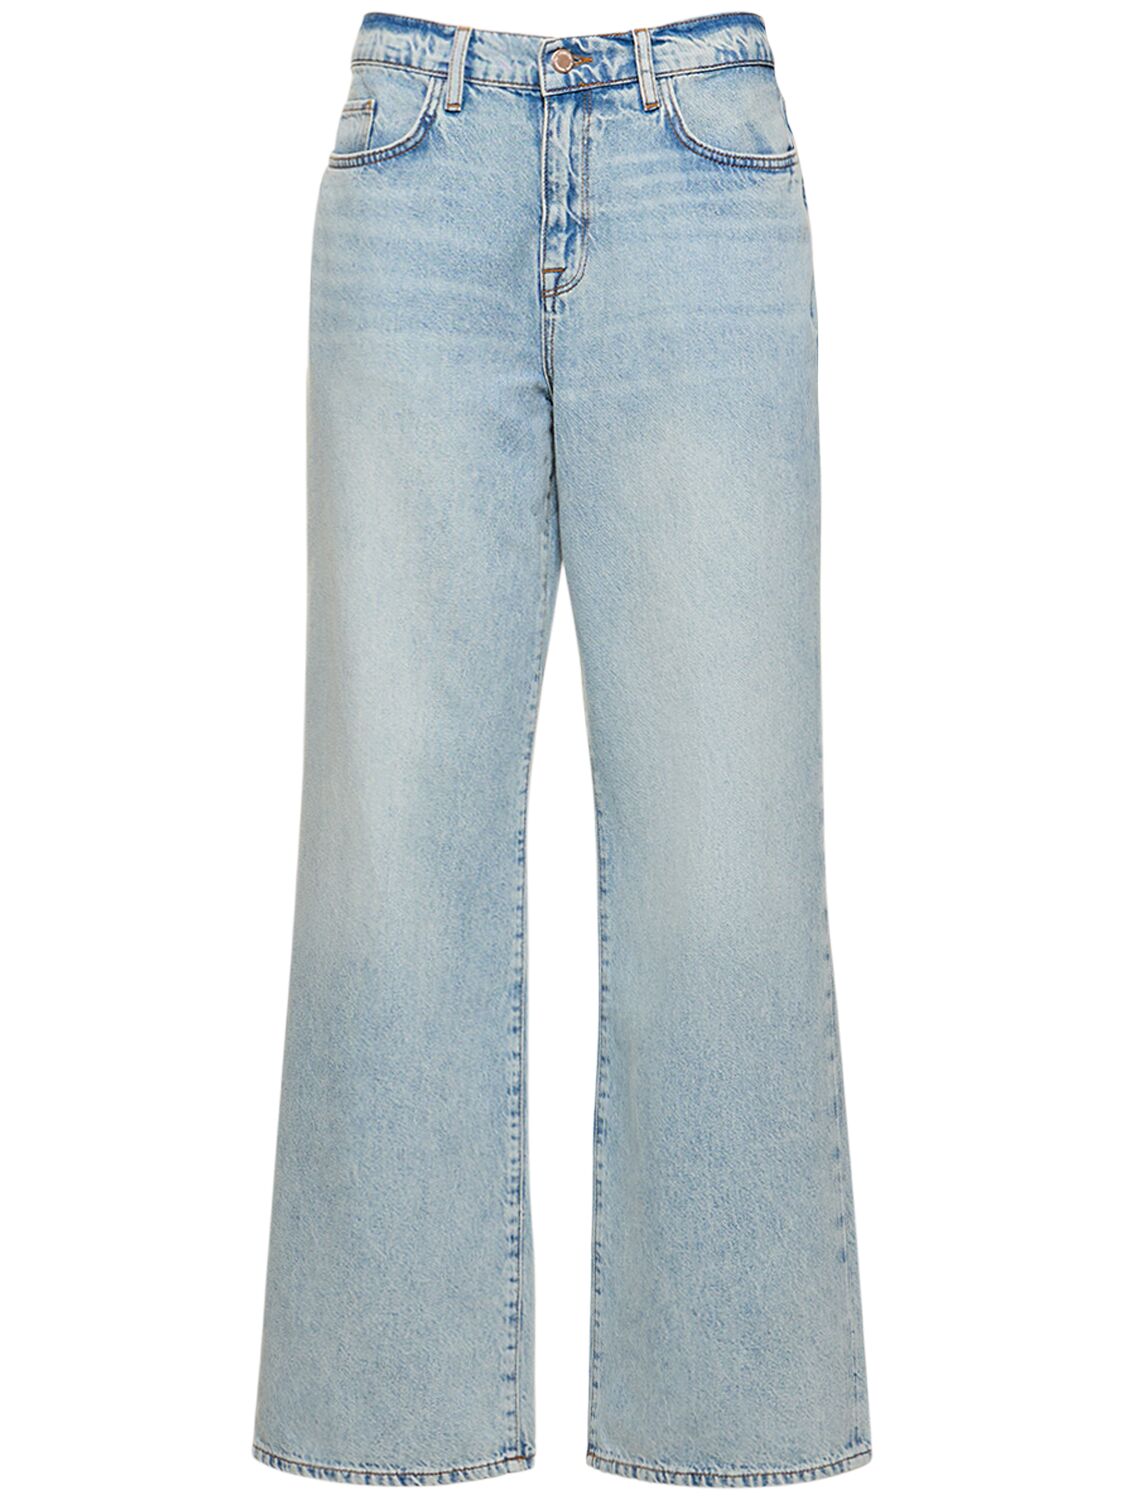 Triarchy Ms. Miley Mid-rise Baggy Cotton Jeans In Summer Light Indigo